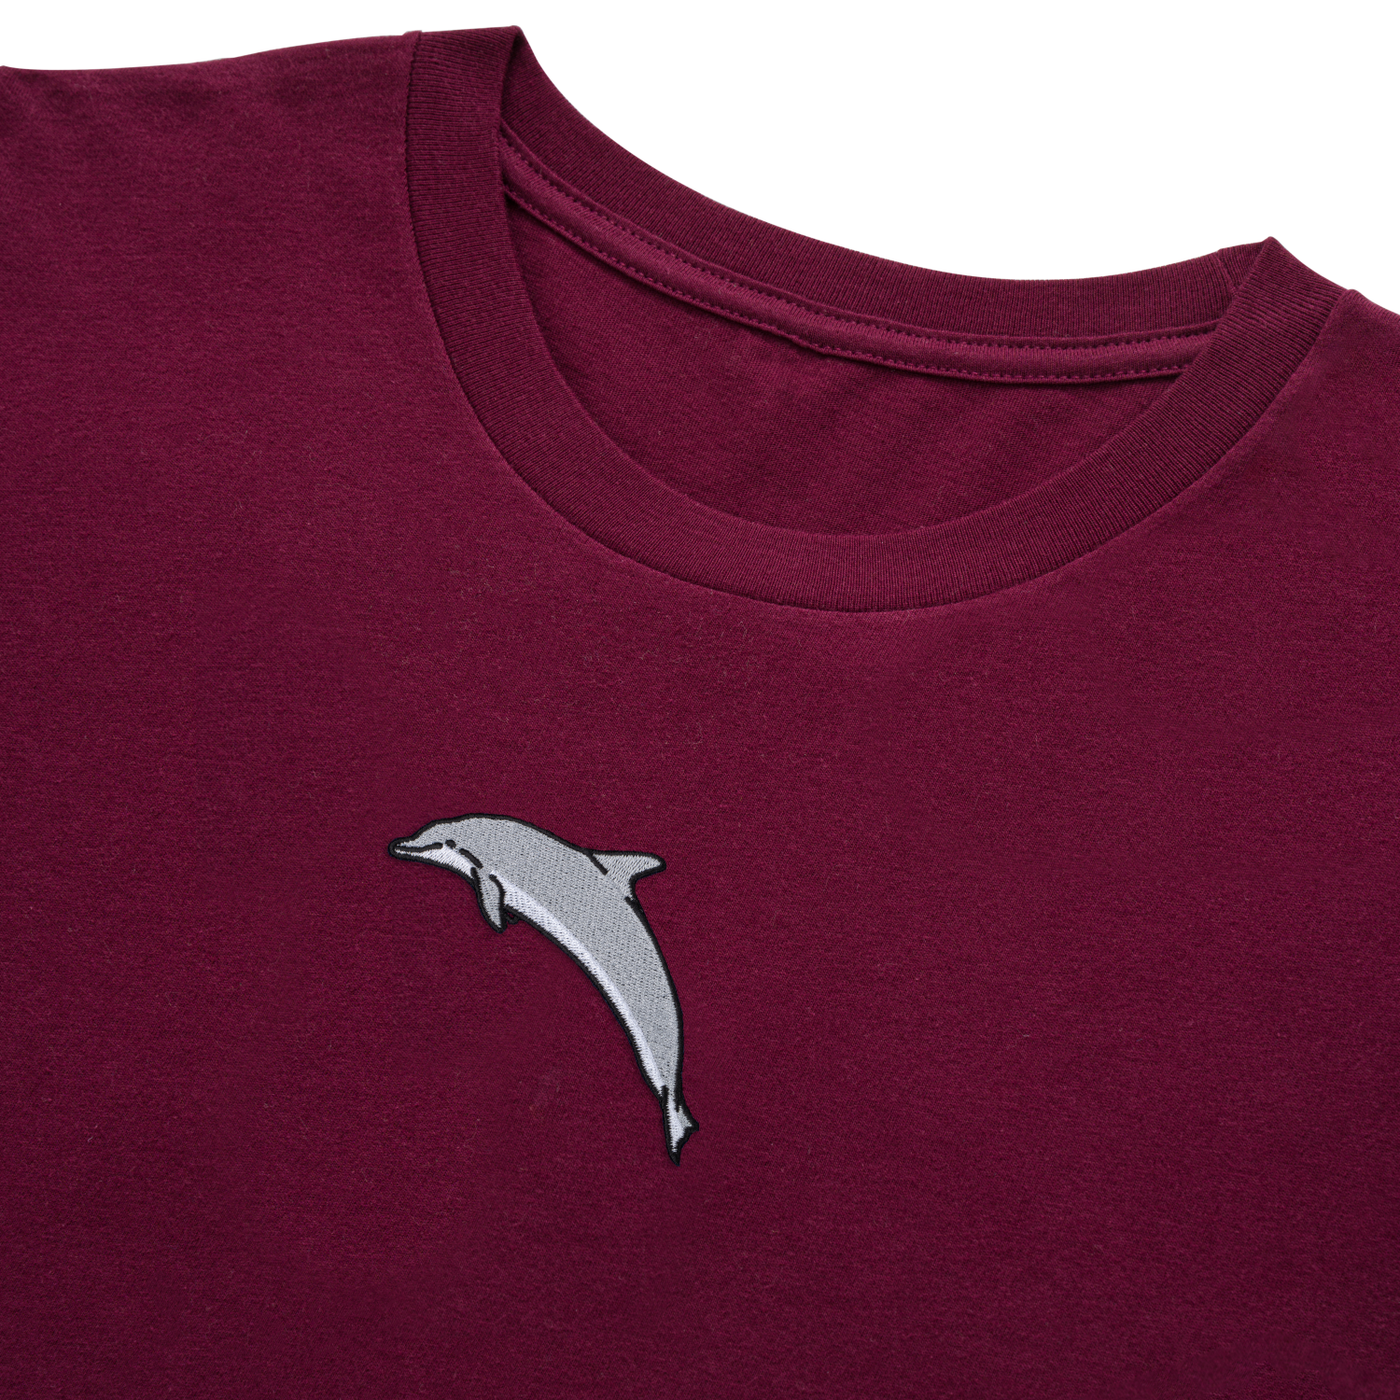 Bobby's Planet Women's Embroidered Dolphin Long Sleeve Shirt from Seven Seas Fish Animals Collection in Maroon Color#color_maroon